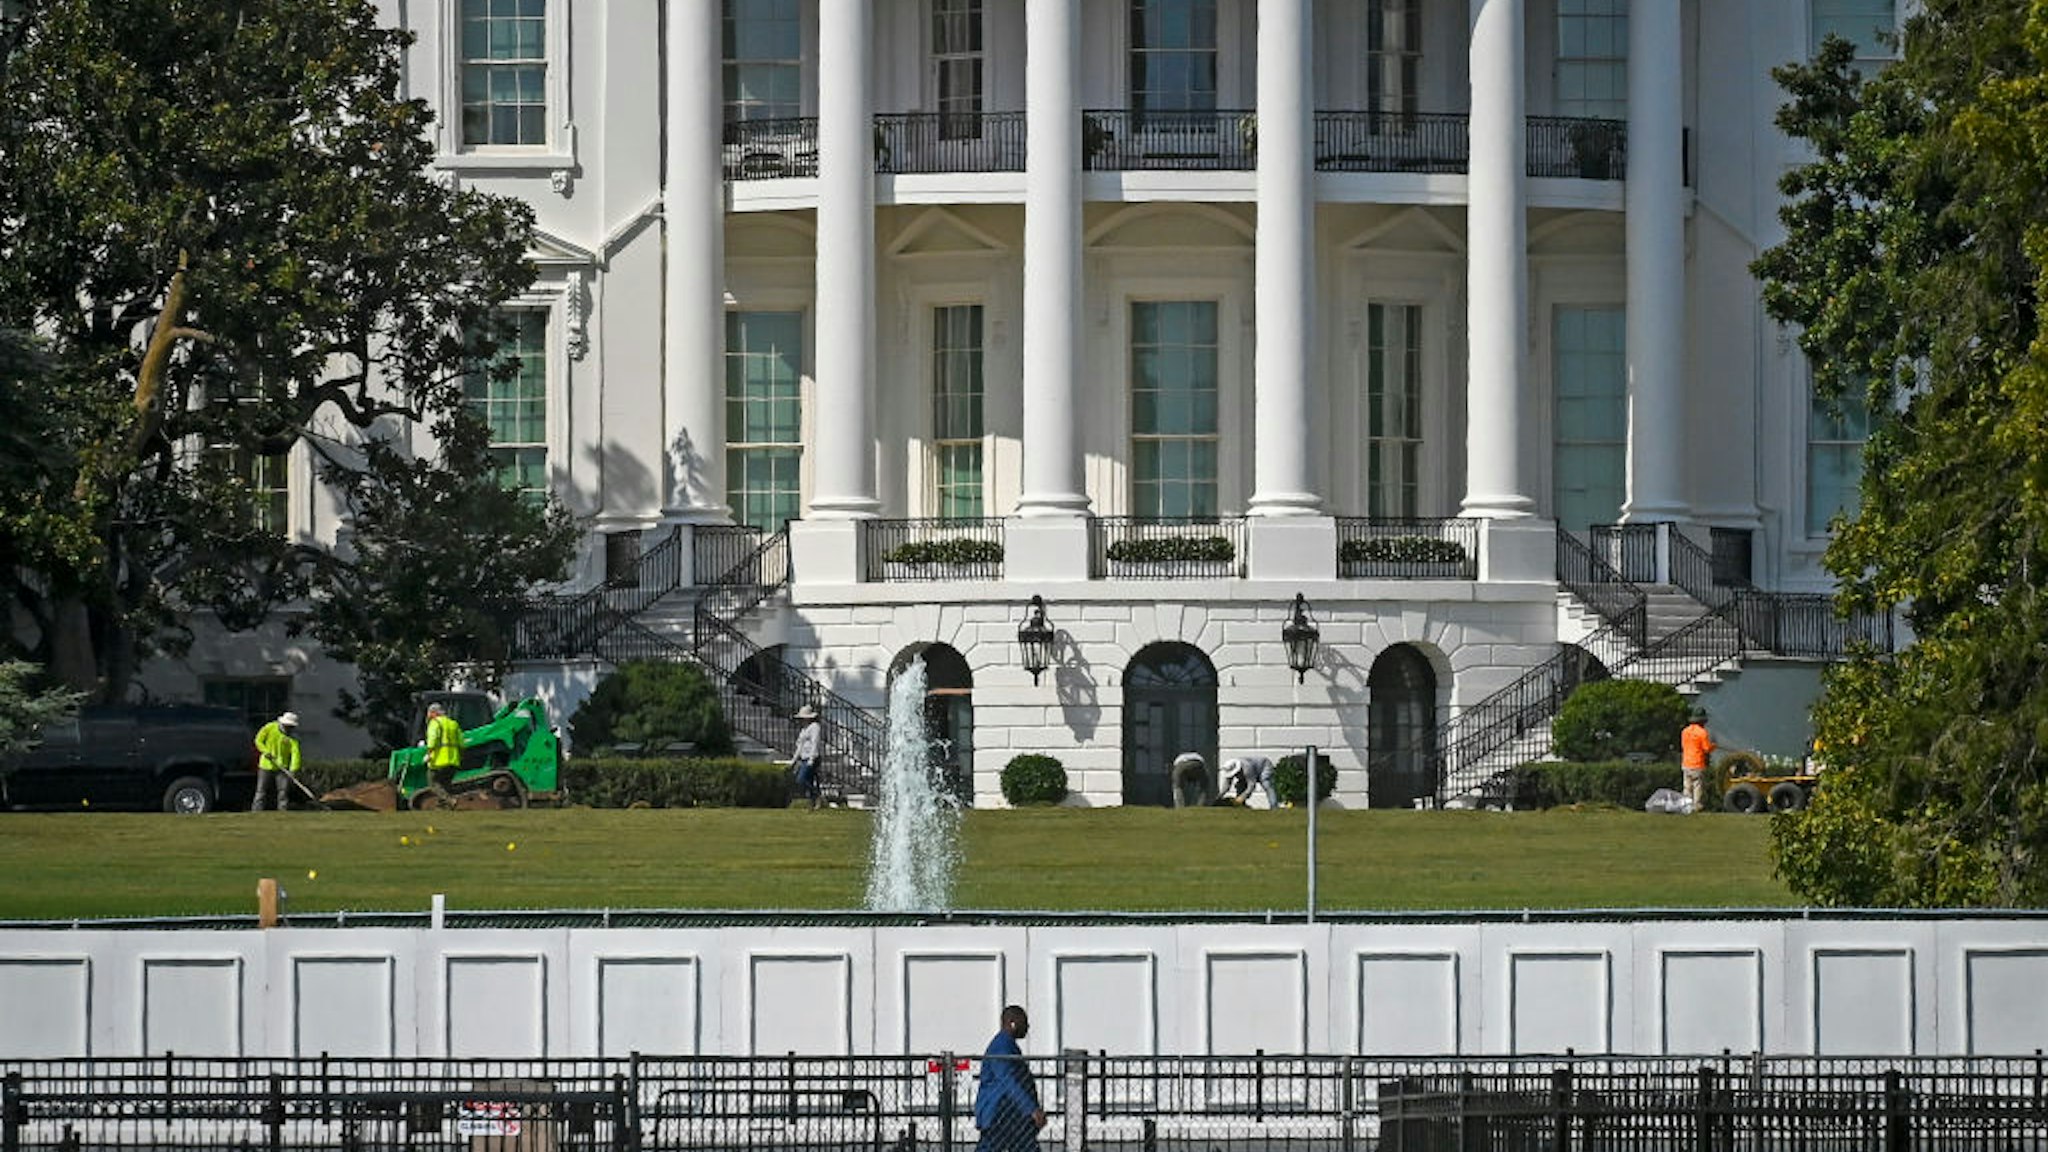 WASHINGTON, DC - September 08: A view of the south lawn of the White House in the wake of the RNC celebration held there, in Washington, DC on September 08.